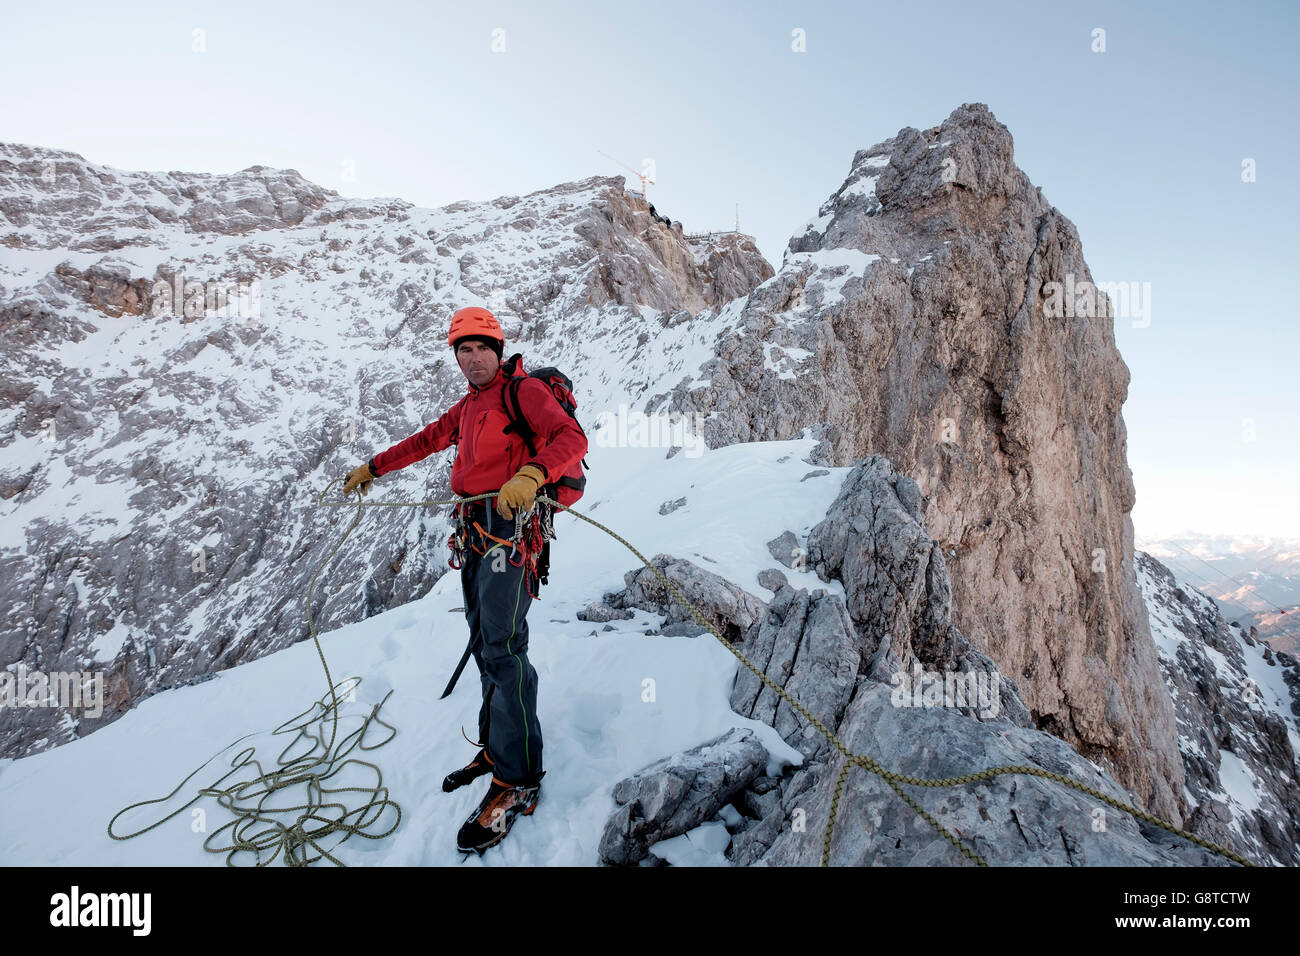 Mountain guide adjusting rope on cliff in mountain range Stock Photo